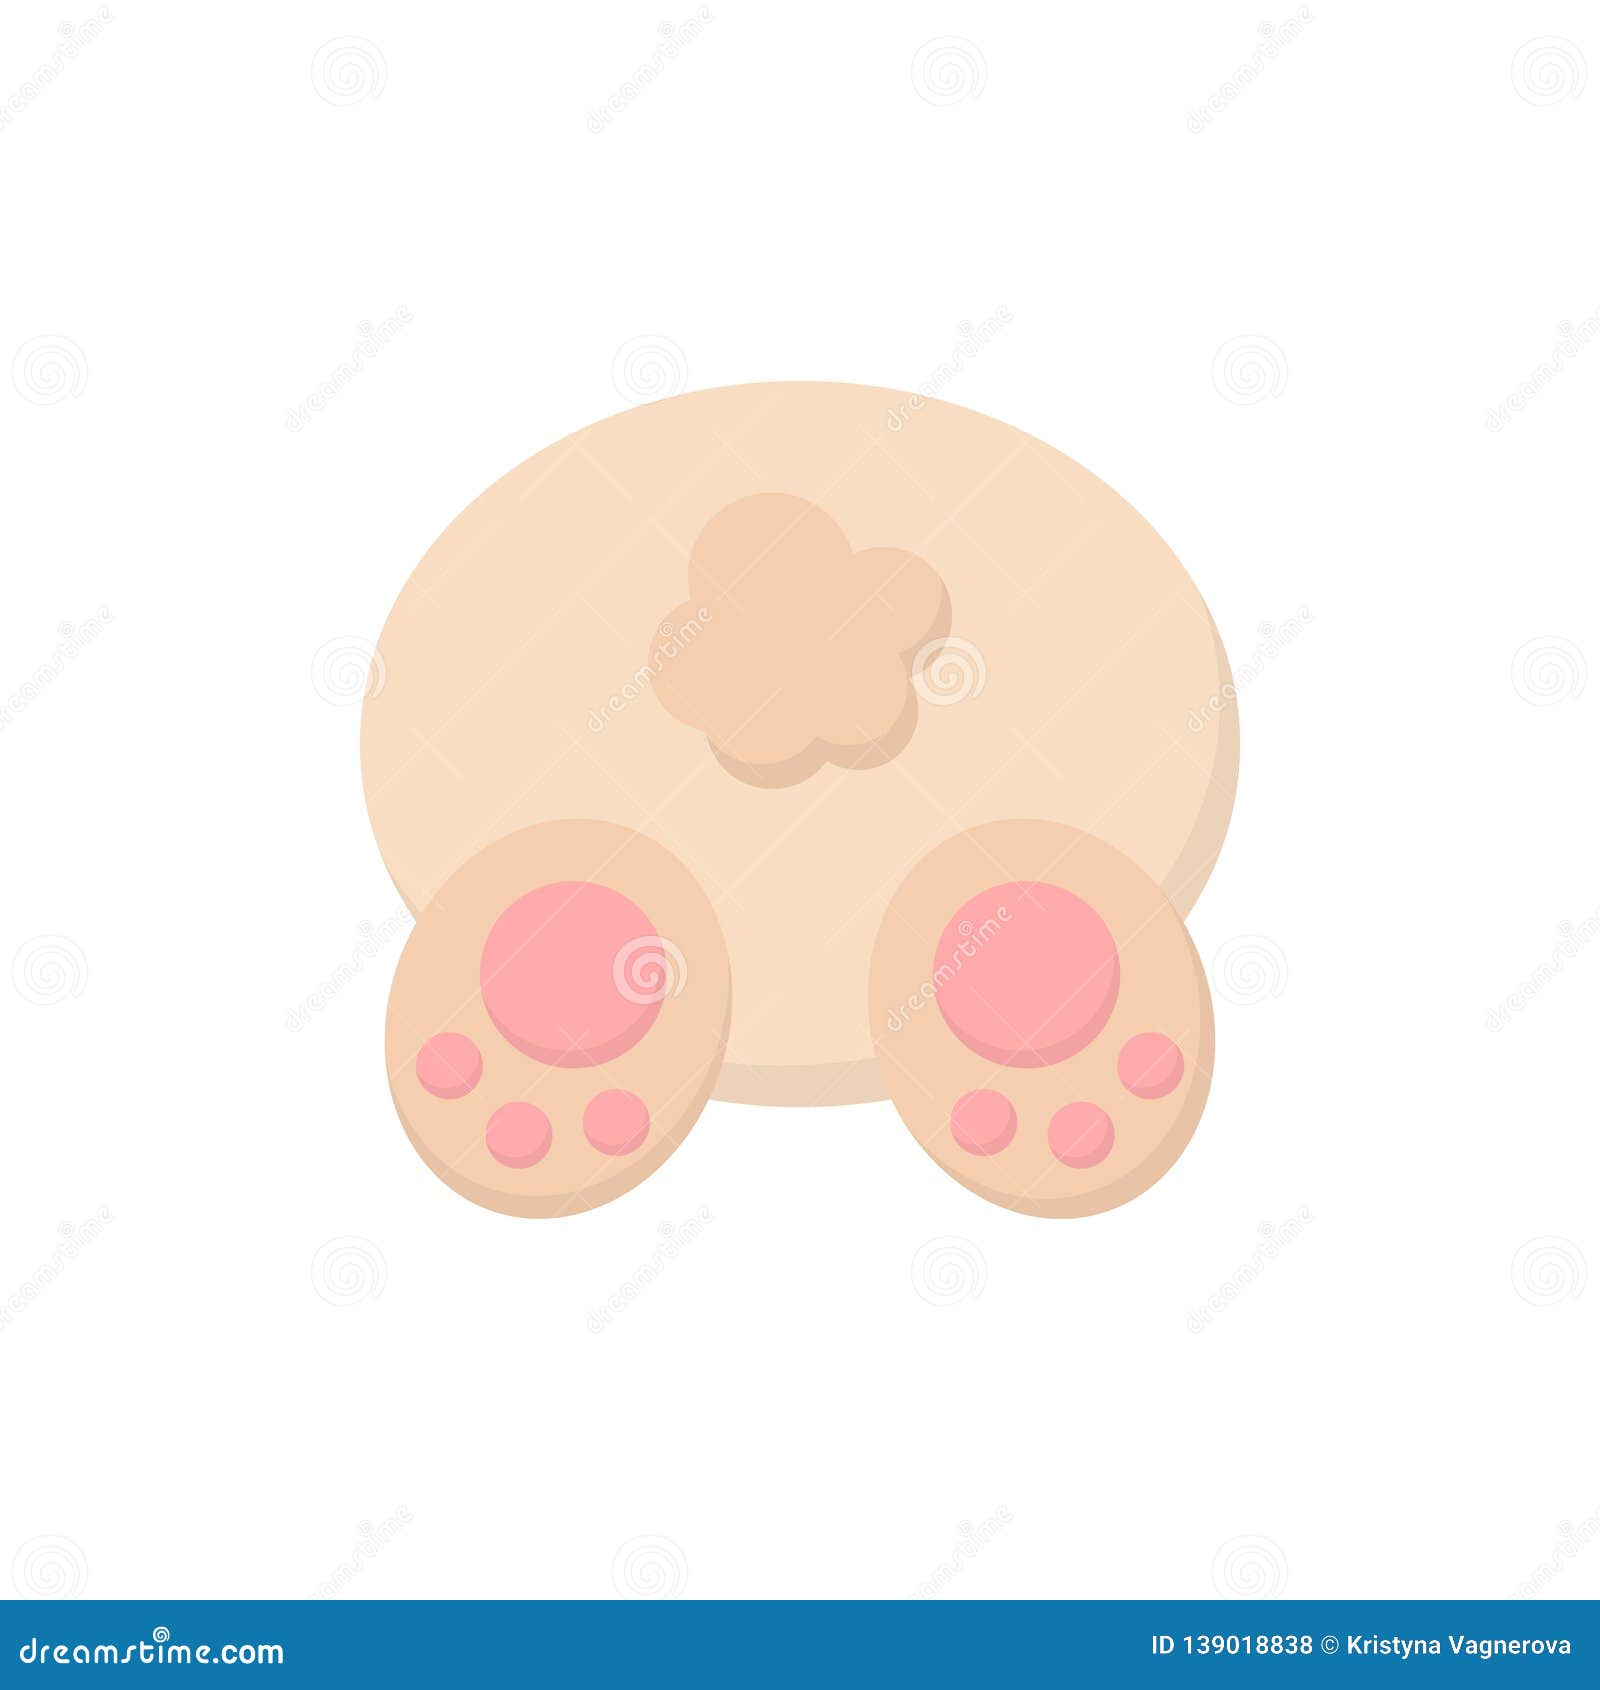 Download Cute Easter Bunny From Back View Stock Vector ...